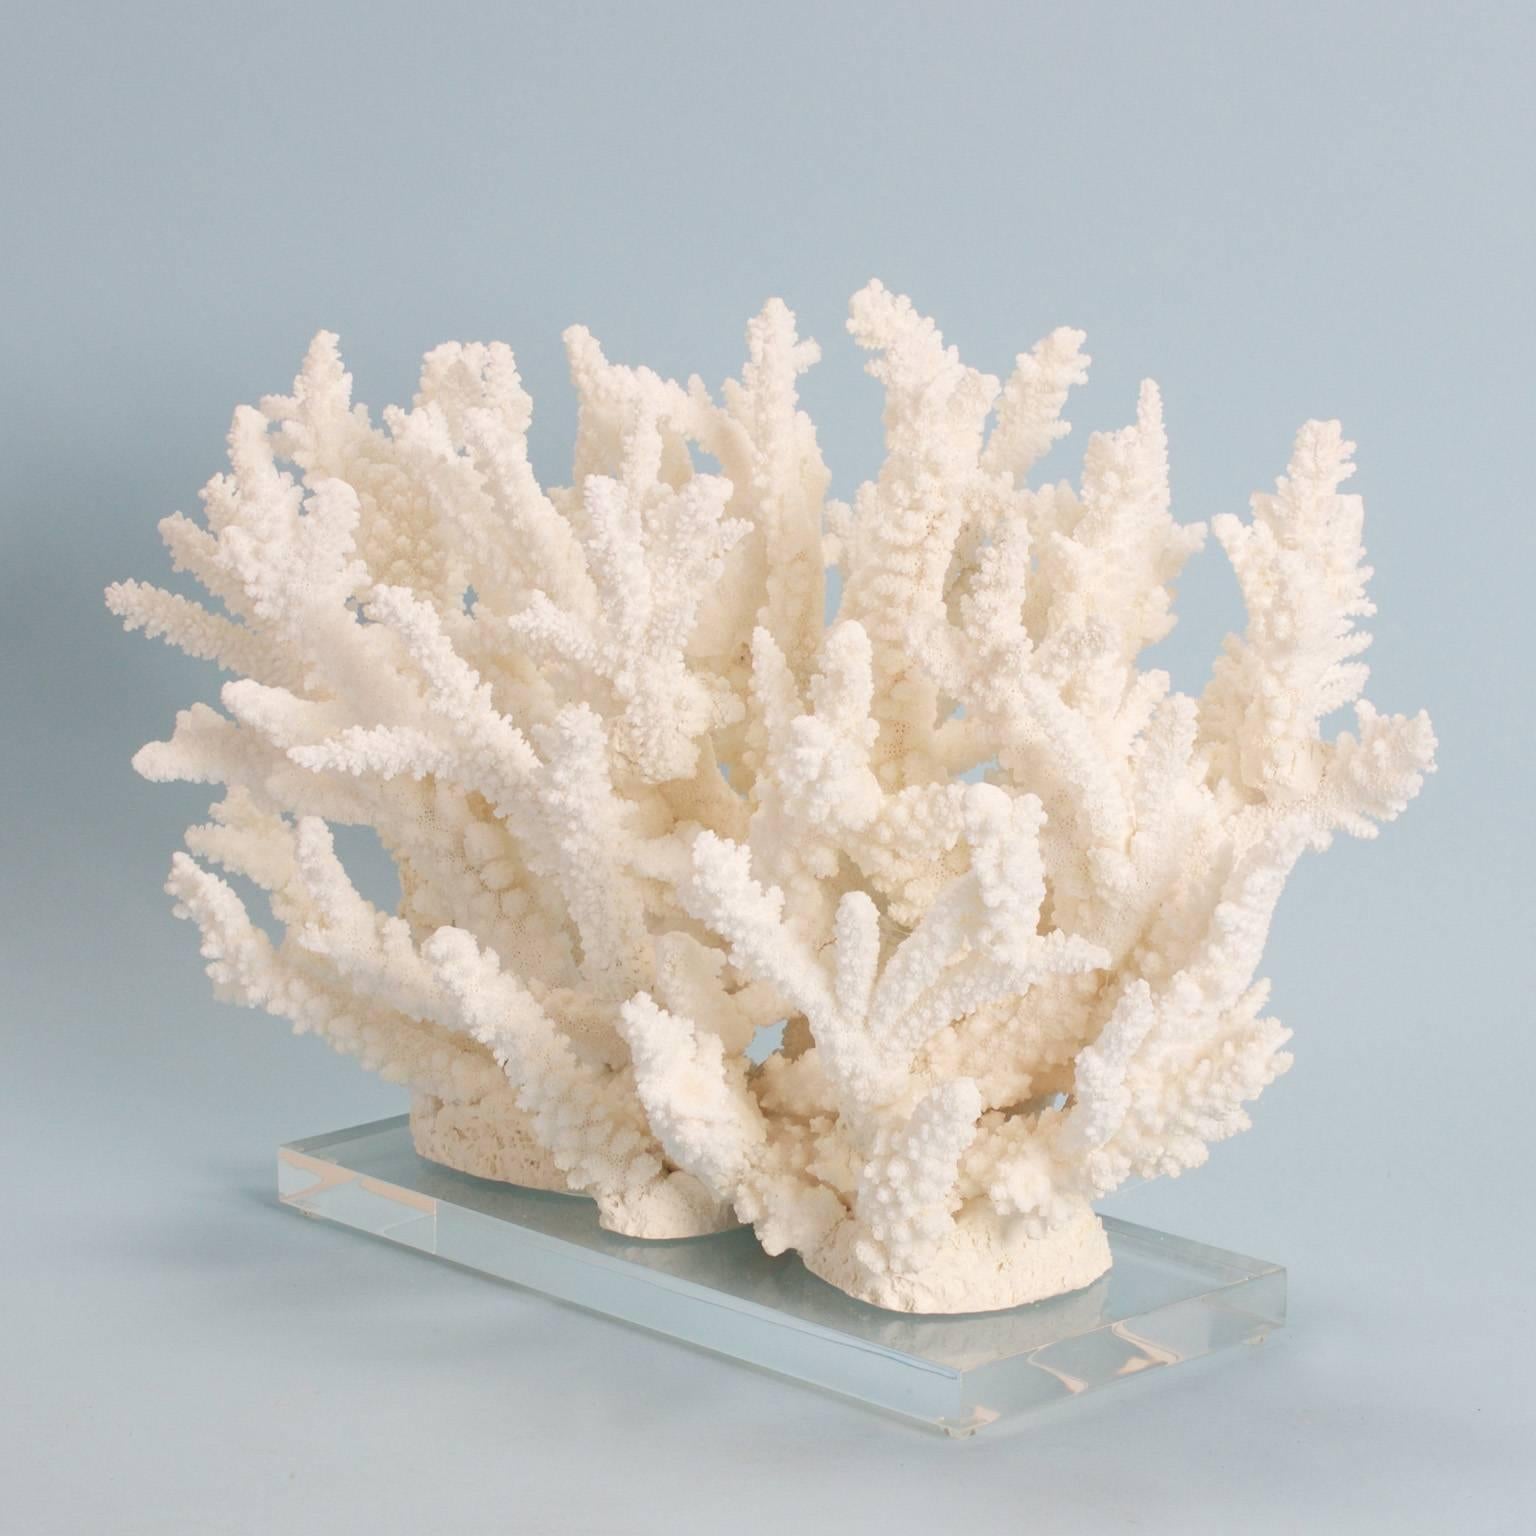 Stunning branch coral assemblage designed and executed by F S Henemader with authentic farm raised coral specimens and presented on a Lucite stand. Perfect for island, coastal or any style of living that appreciates natural beauty. Base: 15 x 6.5.